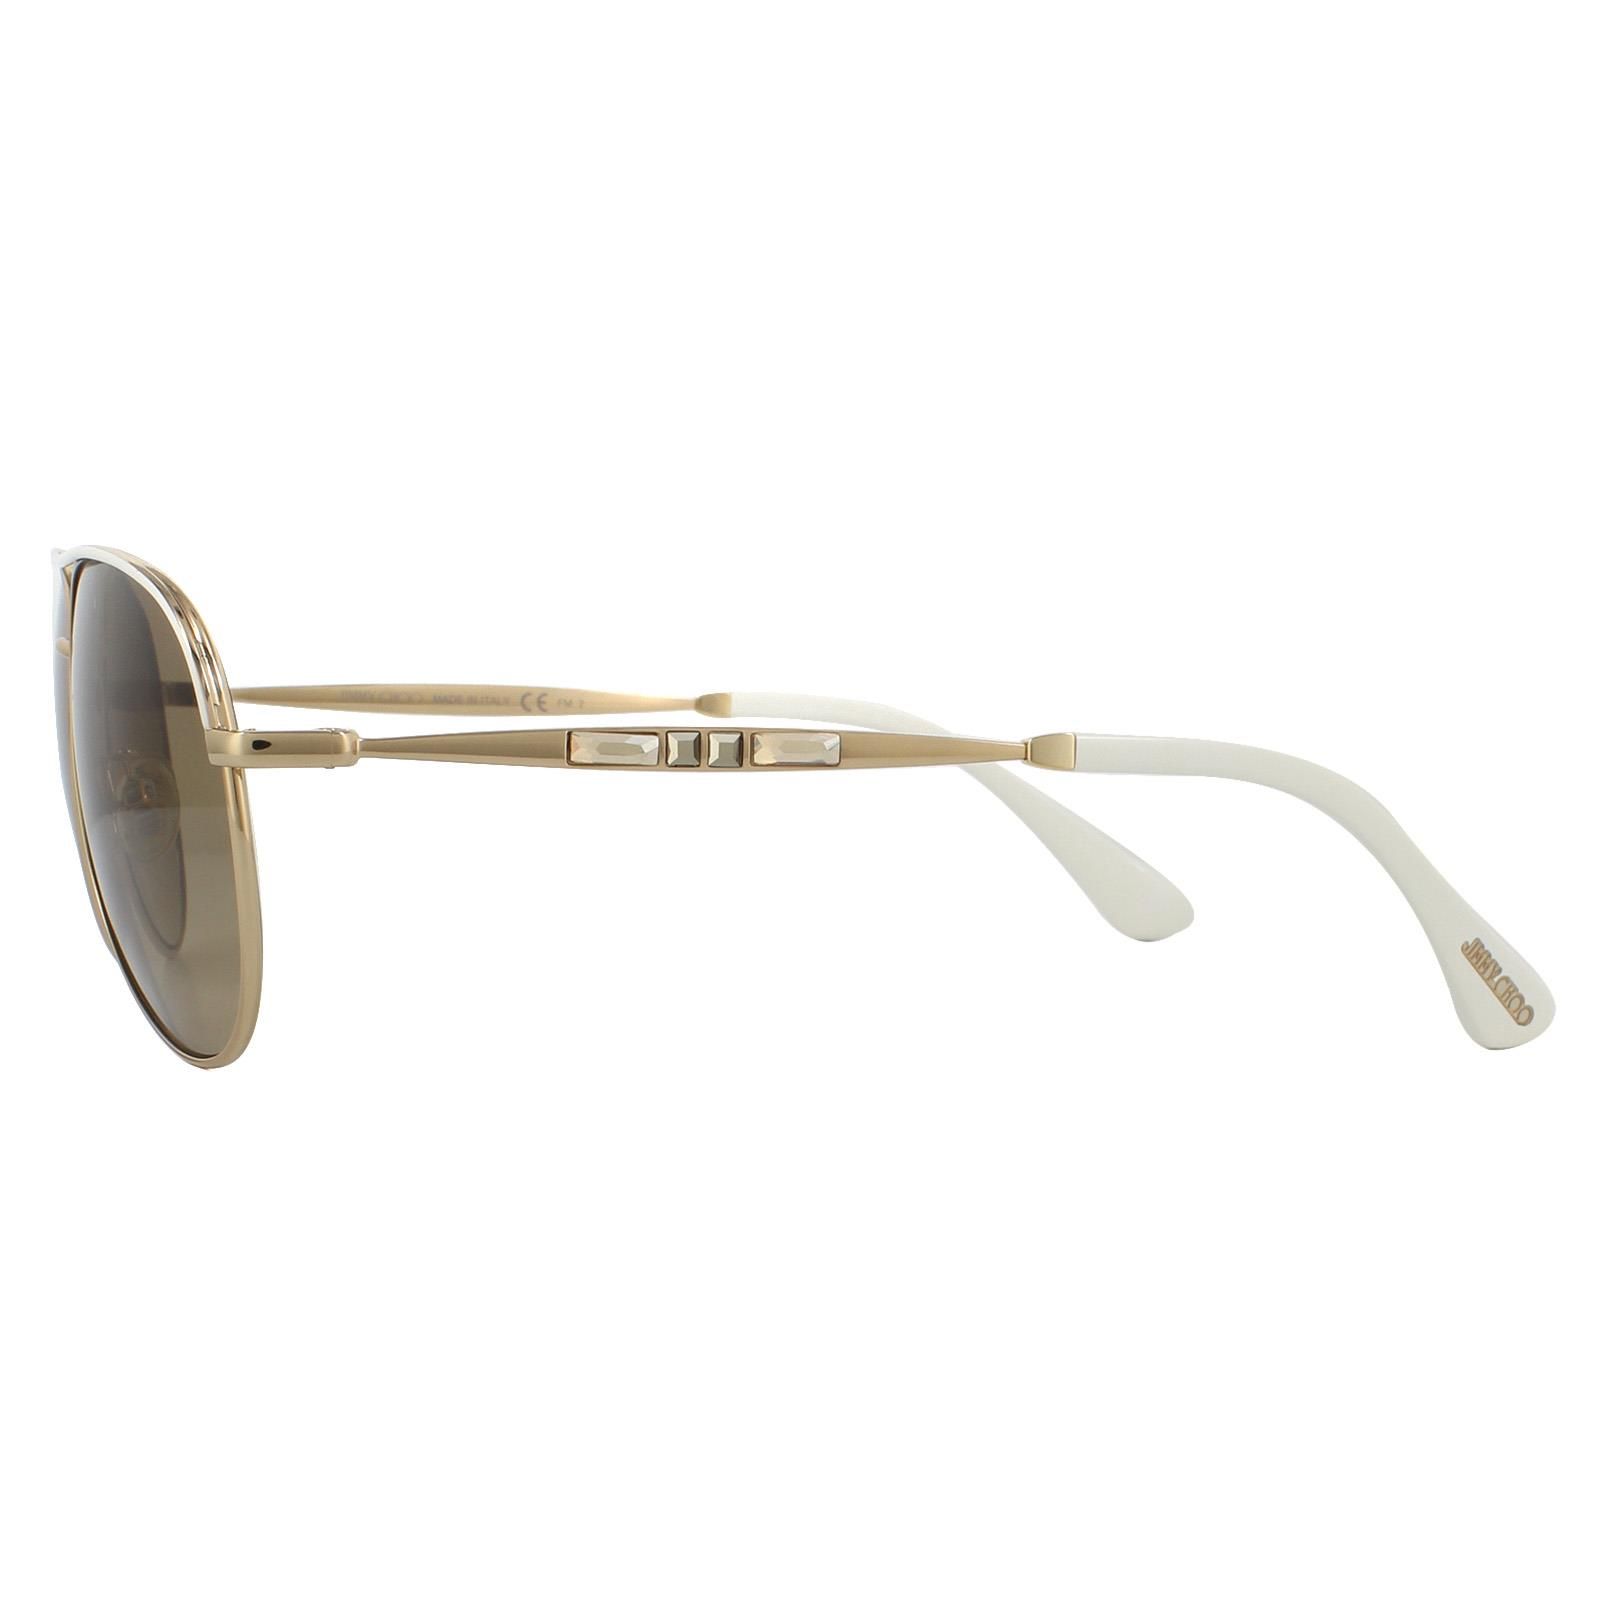 Jimmy Choo Sunglasses Jewly/S 150 S1 Rose Gold Ivory Brown Gradient are a classic aviator design with jewel embellished temples for a feminine touch.